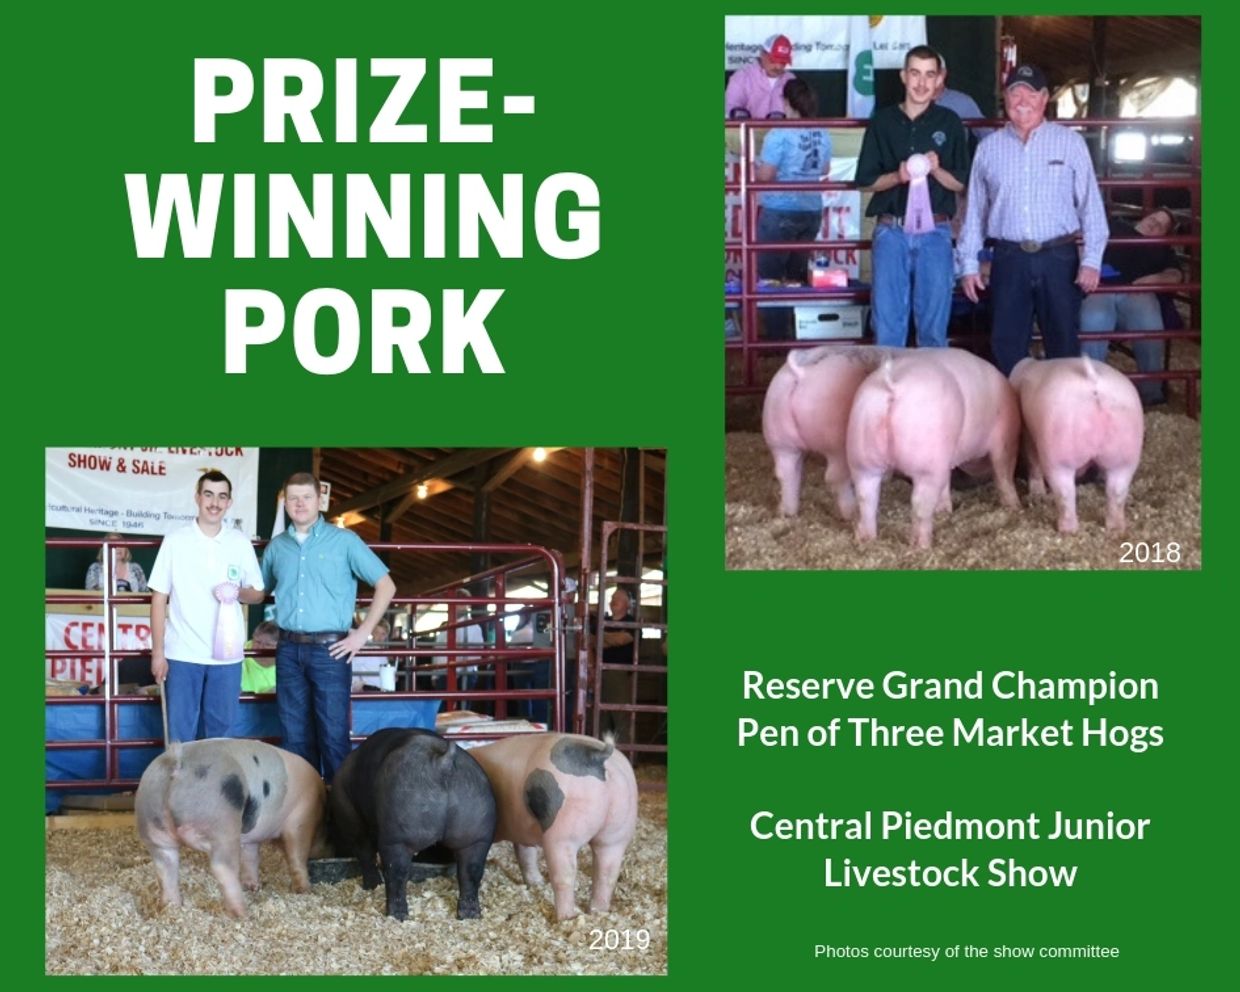 The CPJL Show Grand Champion Market Hog Pen-of-Three has been raised at Double R for 3 years.